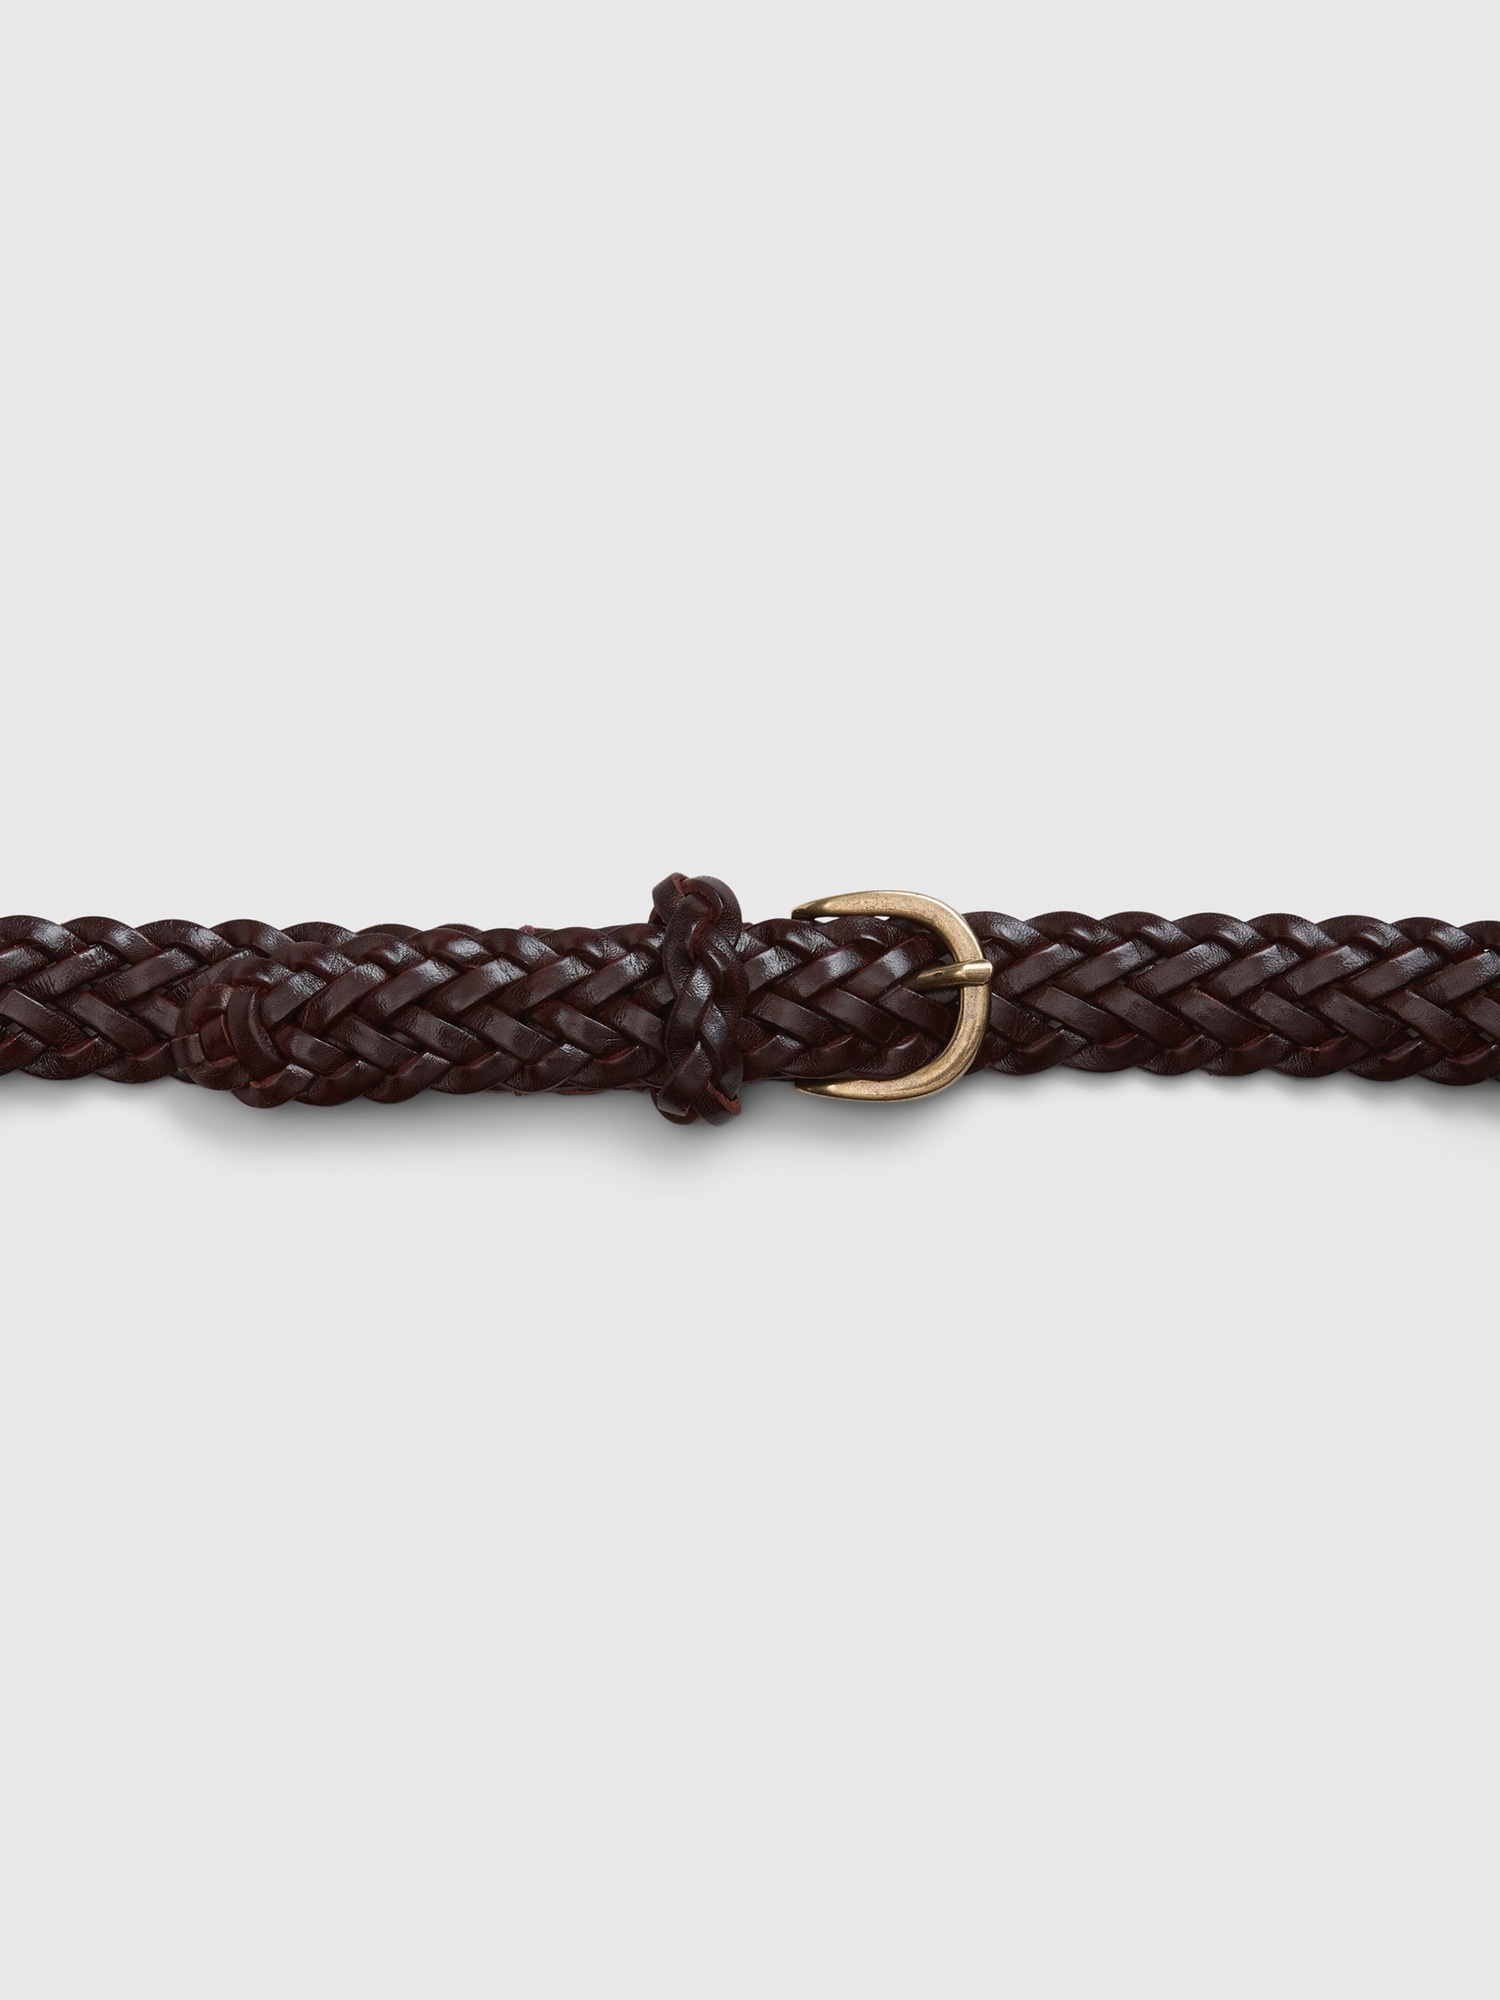 Braided belt in black leather, Quality full grain leather